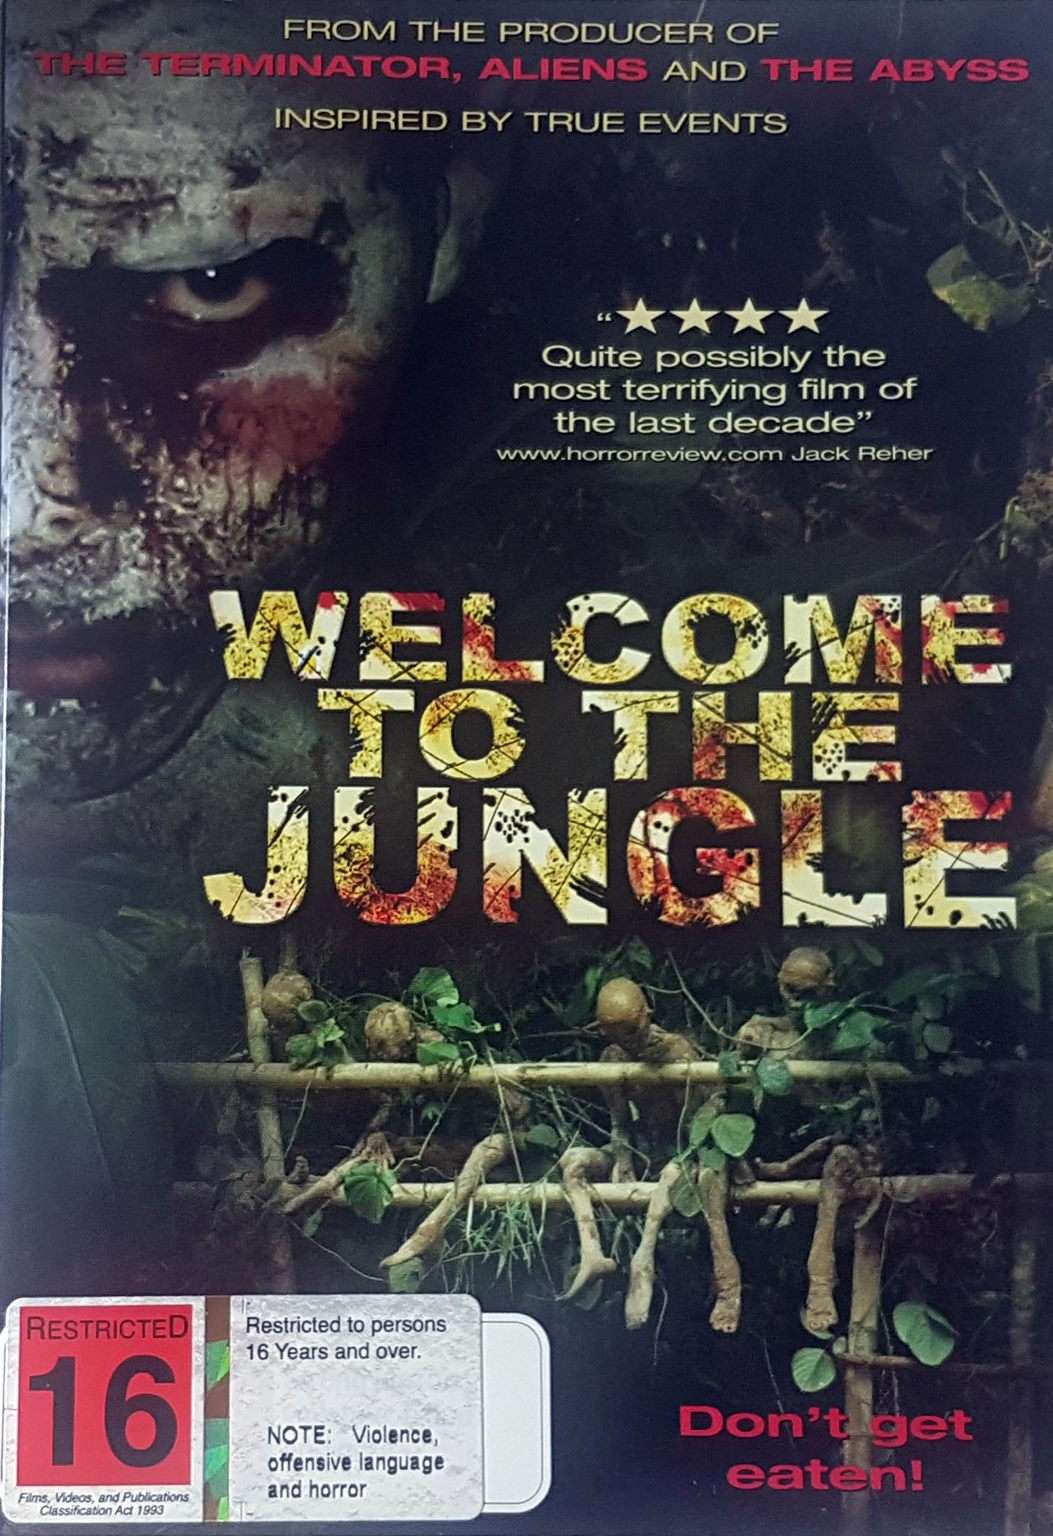 Welcome to the Jungle 2007